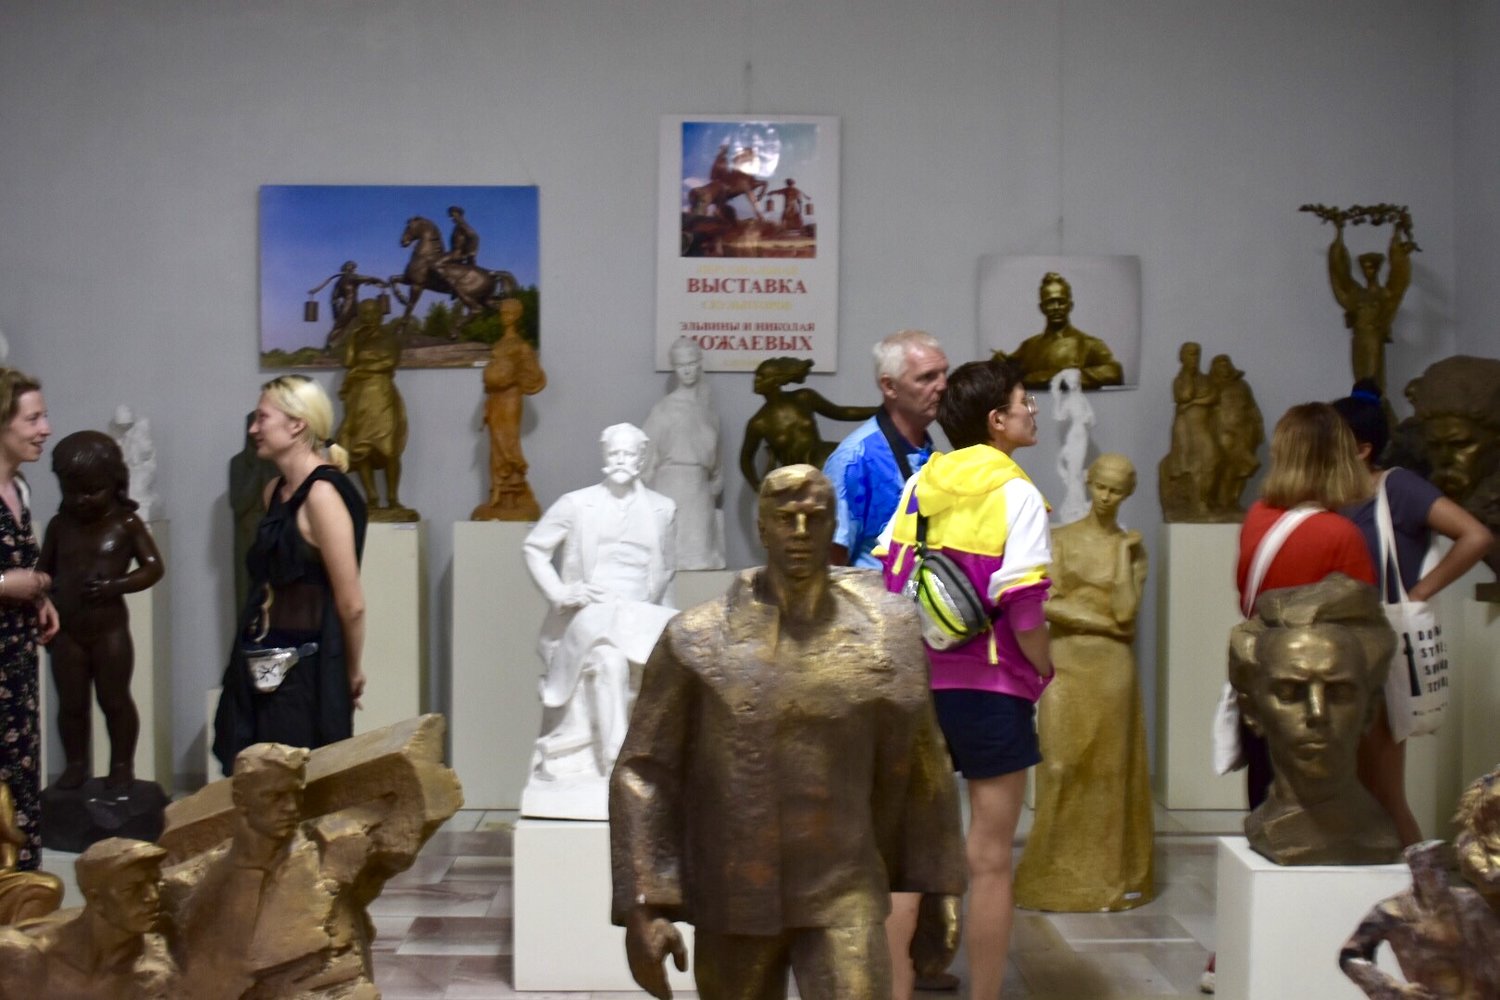 Participants and others reflect upon the phenomenon of Soviet sculpture in the context of debates on Decommunization of public spaces, Lysychansk Regional Museum